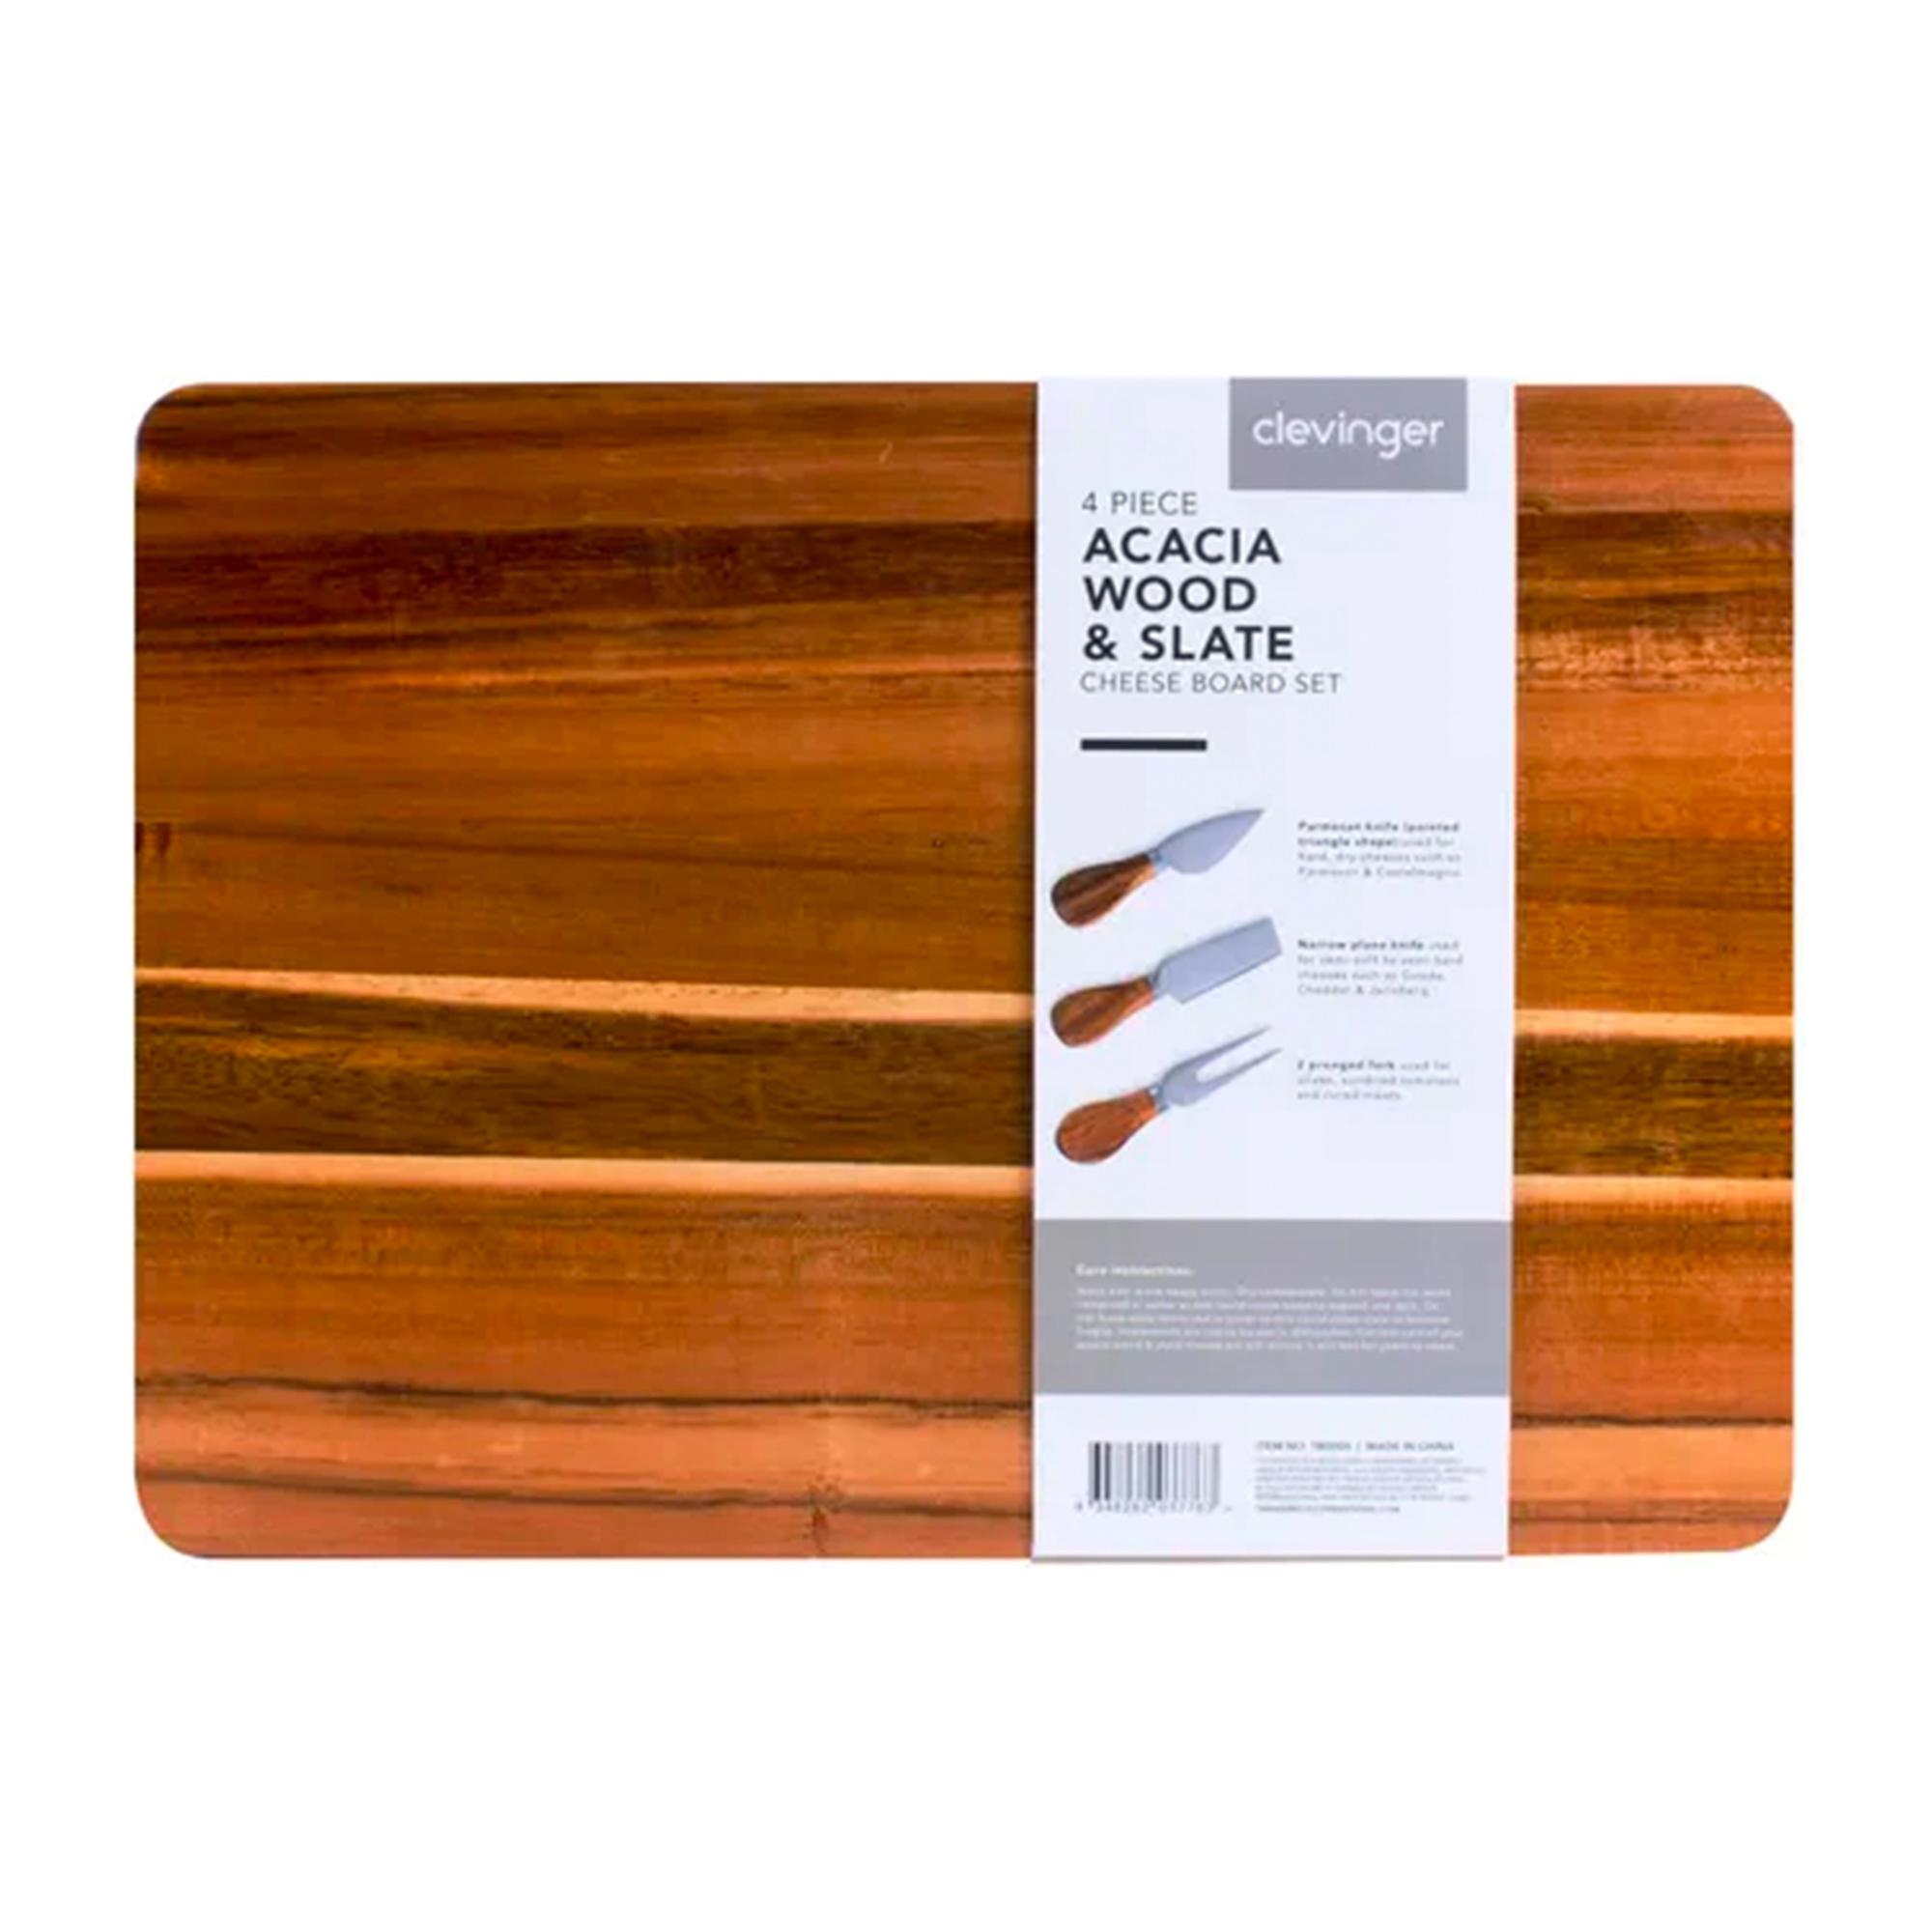 Clevinger Acacia Wood & Slate Cheese Board with Knives Set of 4 Image 3